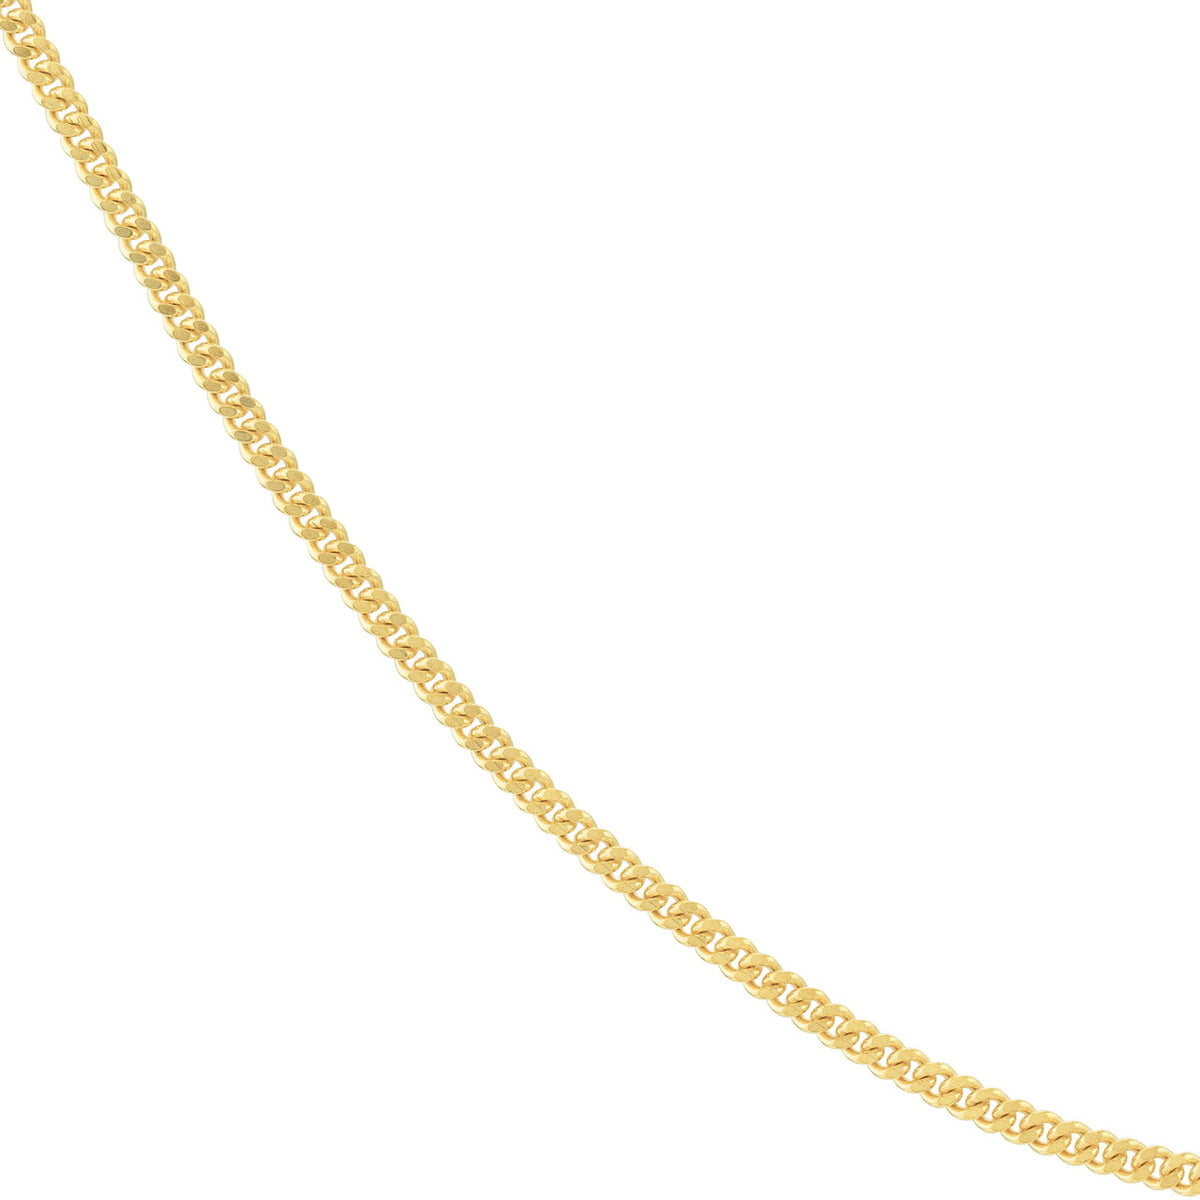 14K Yellow Gold or White Gold 1.4mm Curb Chain Necklace with Lobster Lock